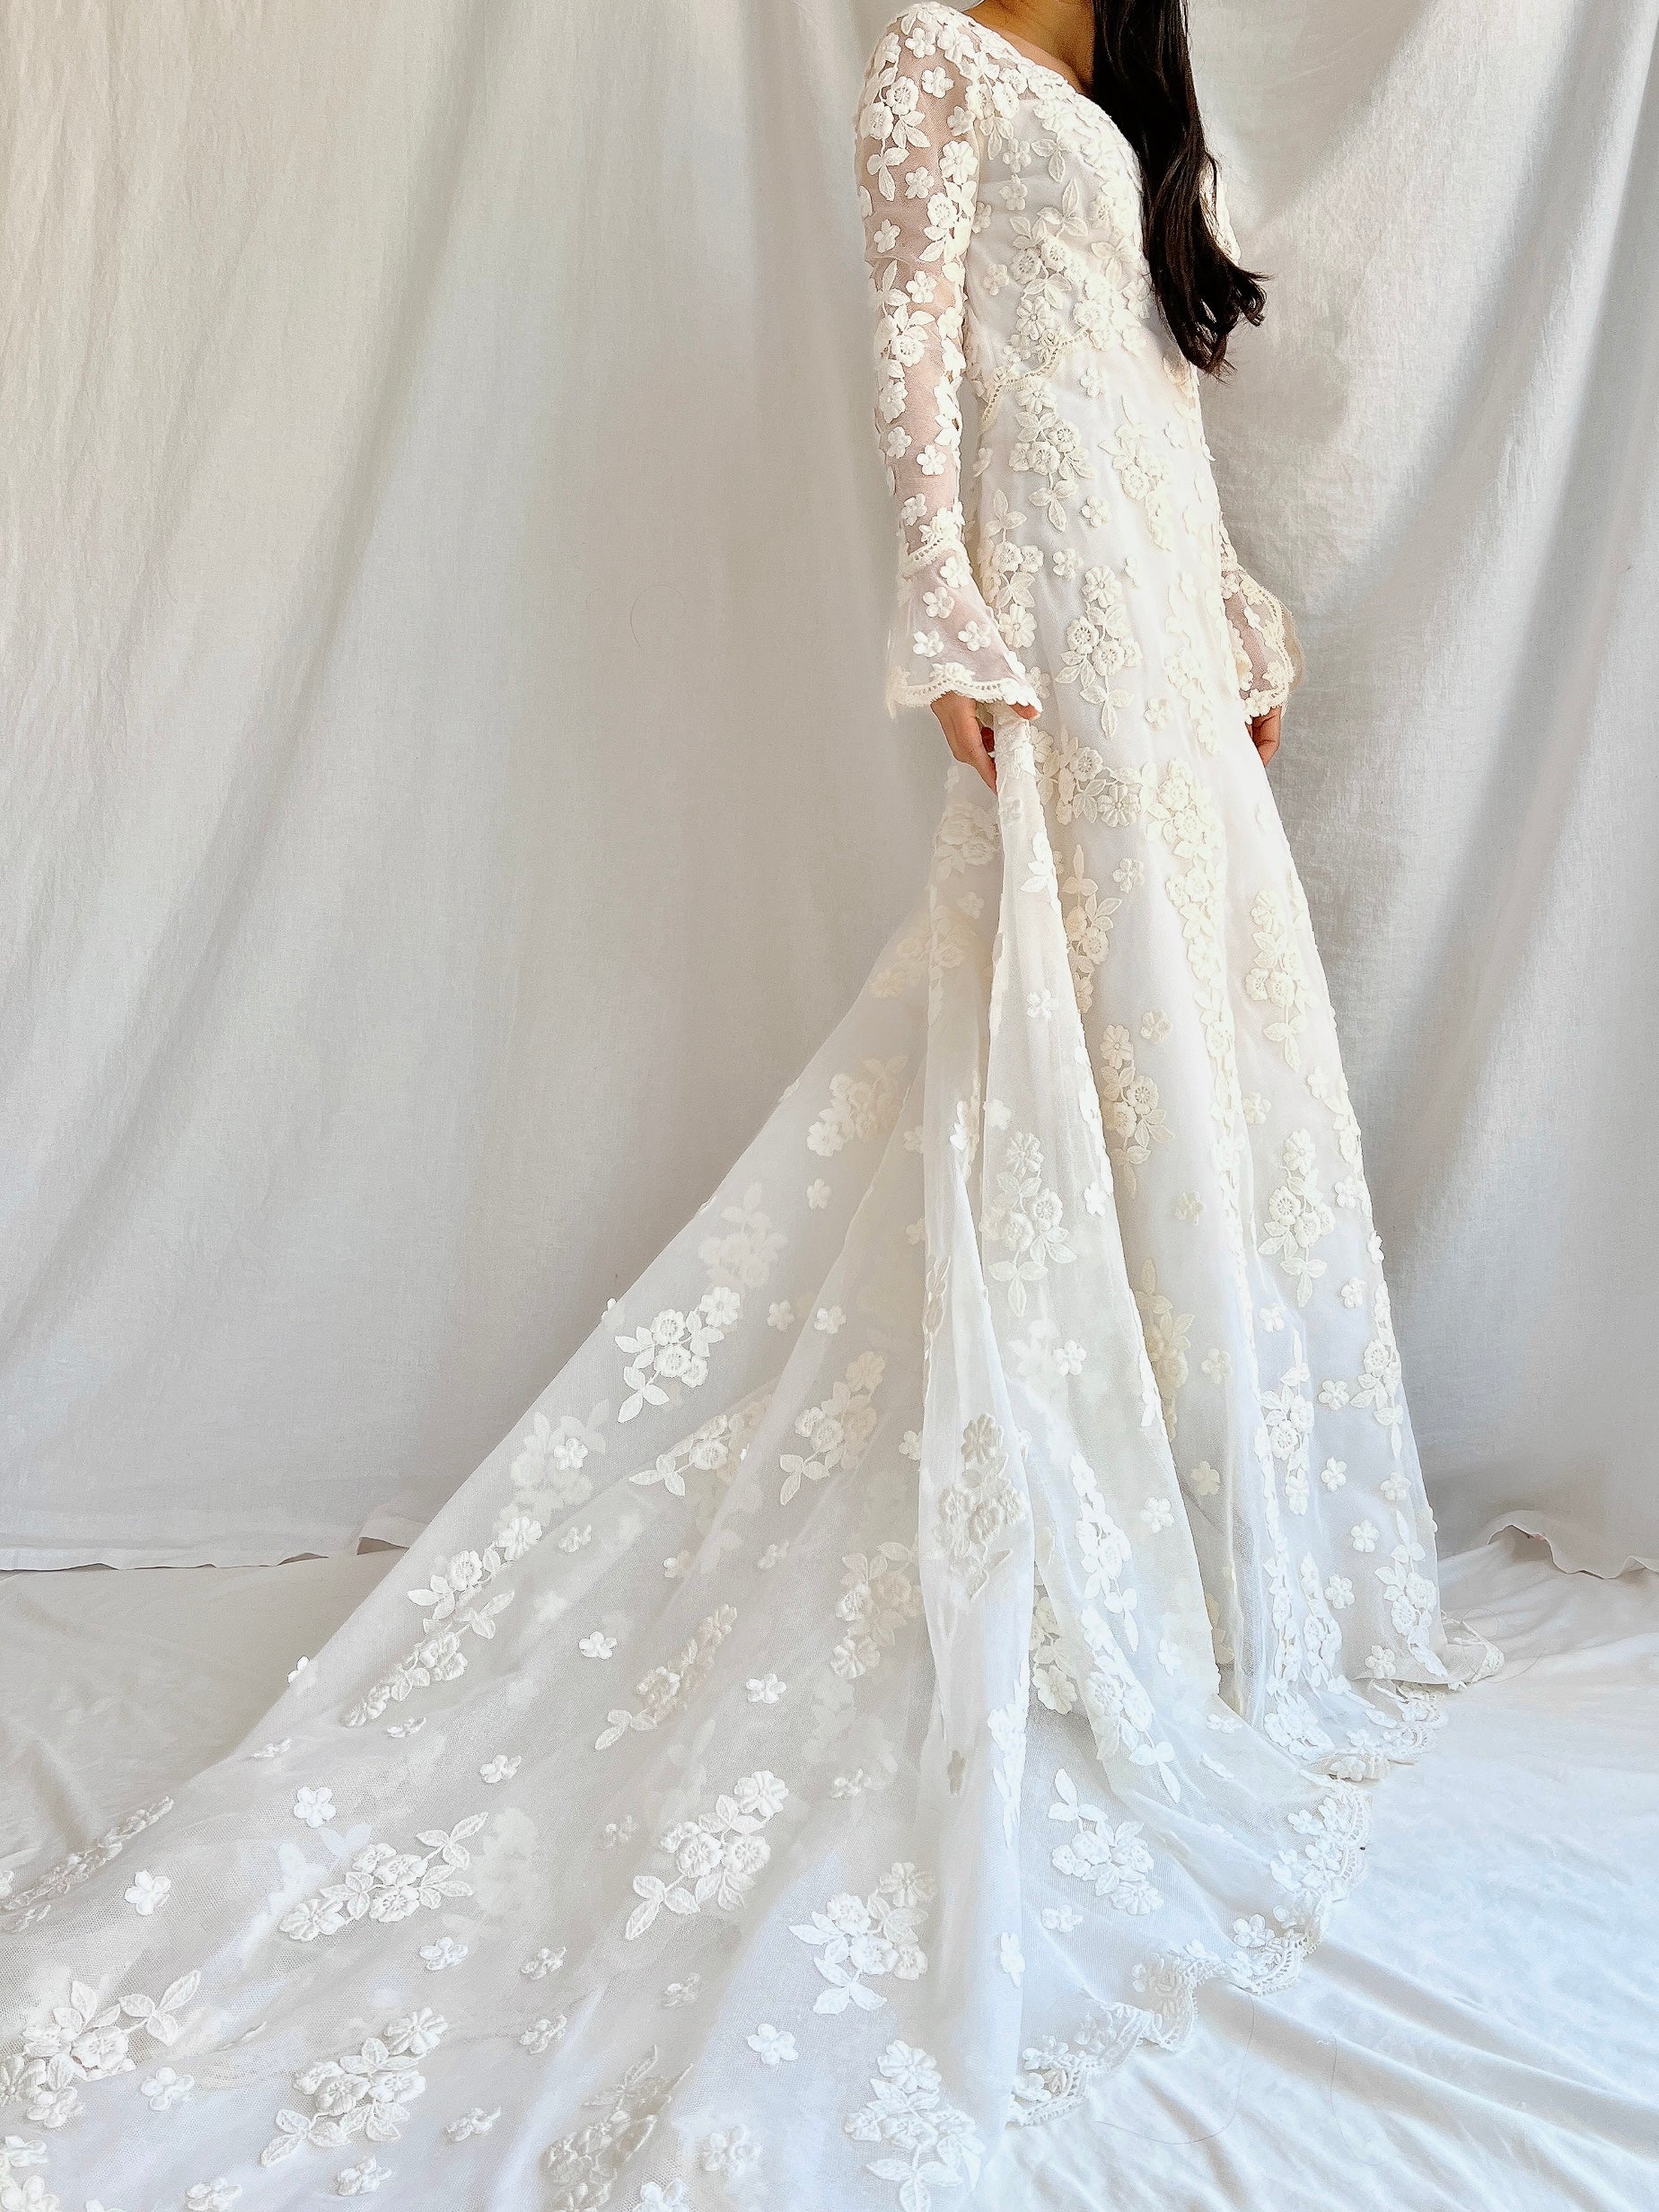 1960s Long Sleeves Floral Appliqué Gown with Veil - S